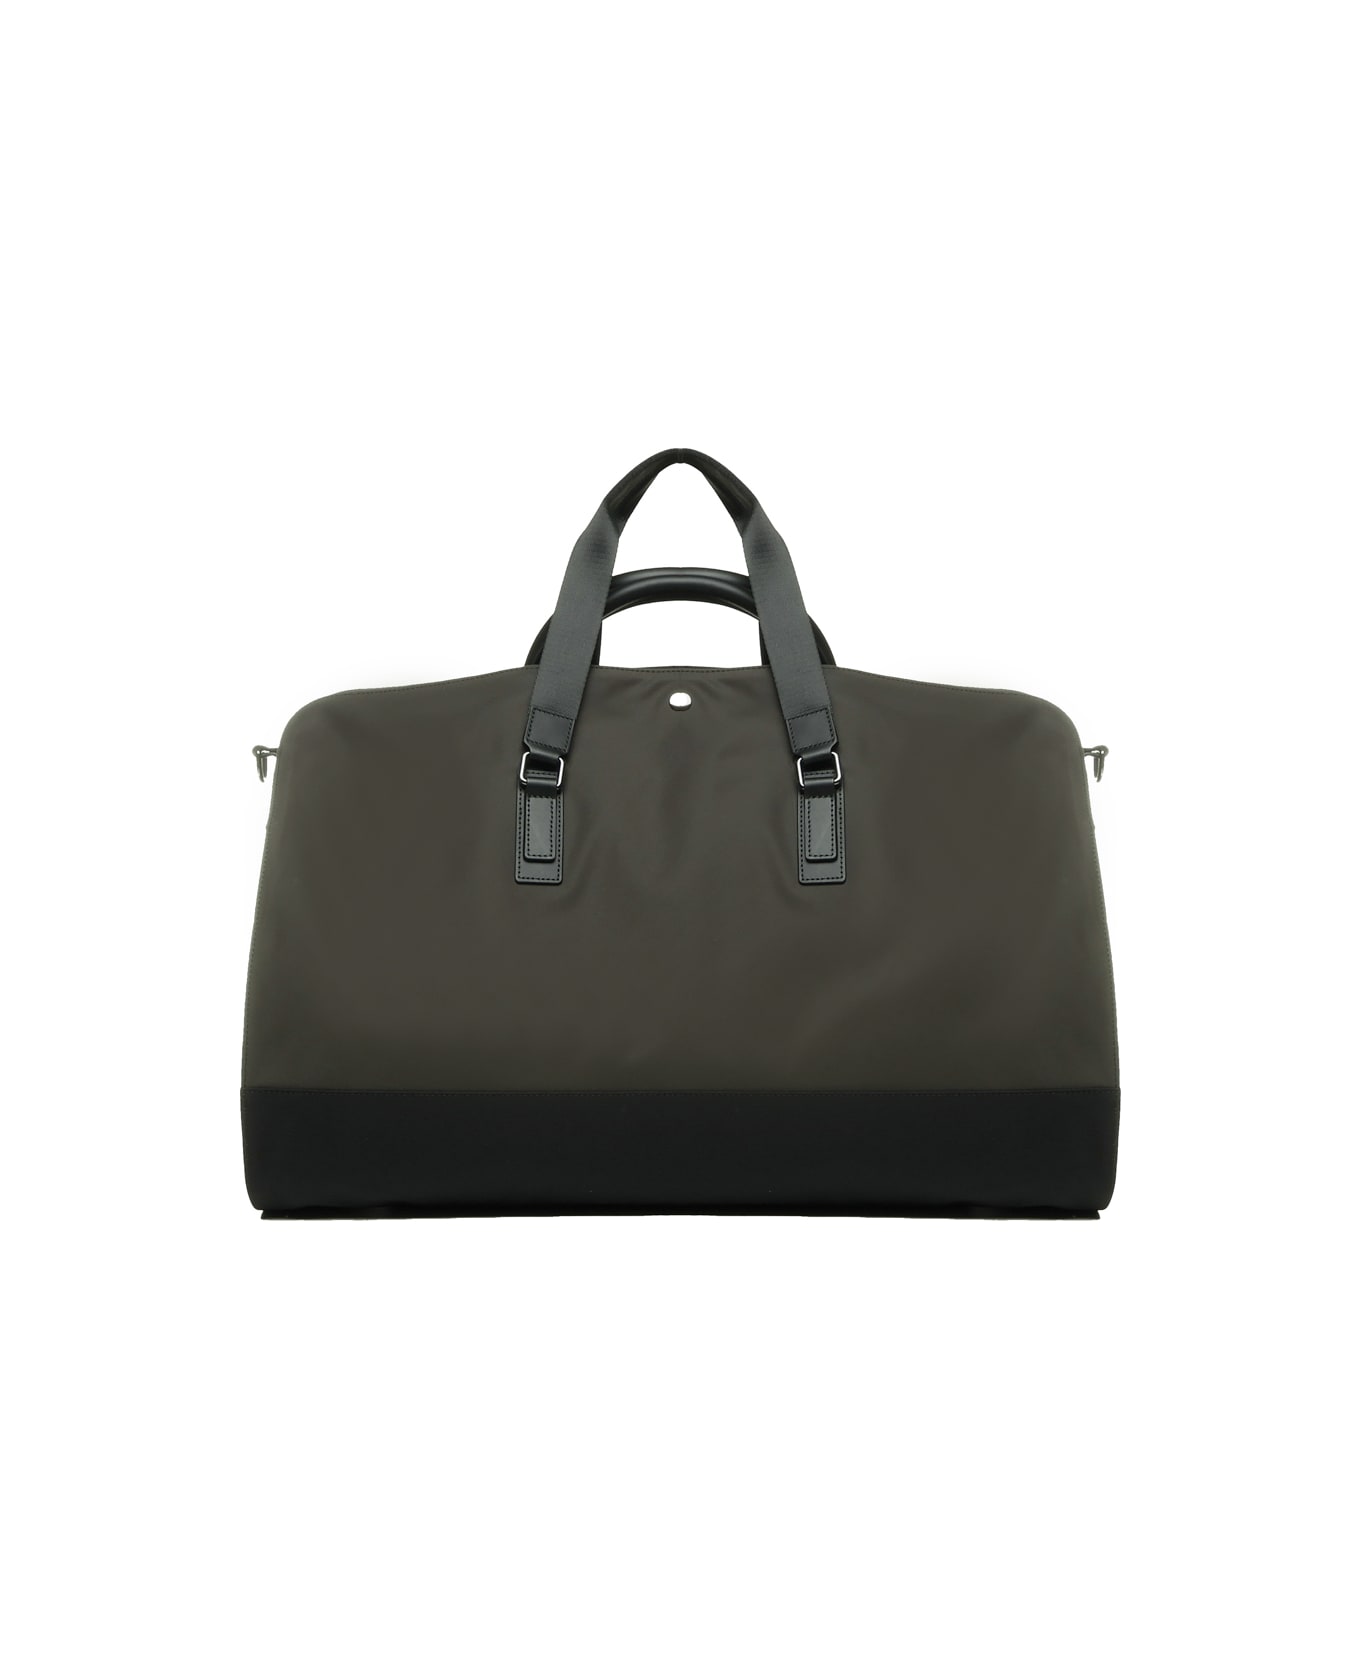 Dsquared2 Urban 2 In 1 Bag Dsquared2 - Grey トラベルバッグ